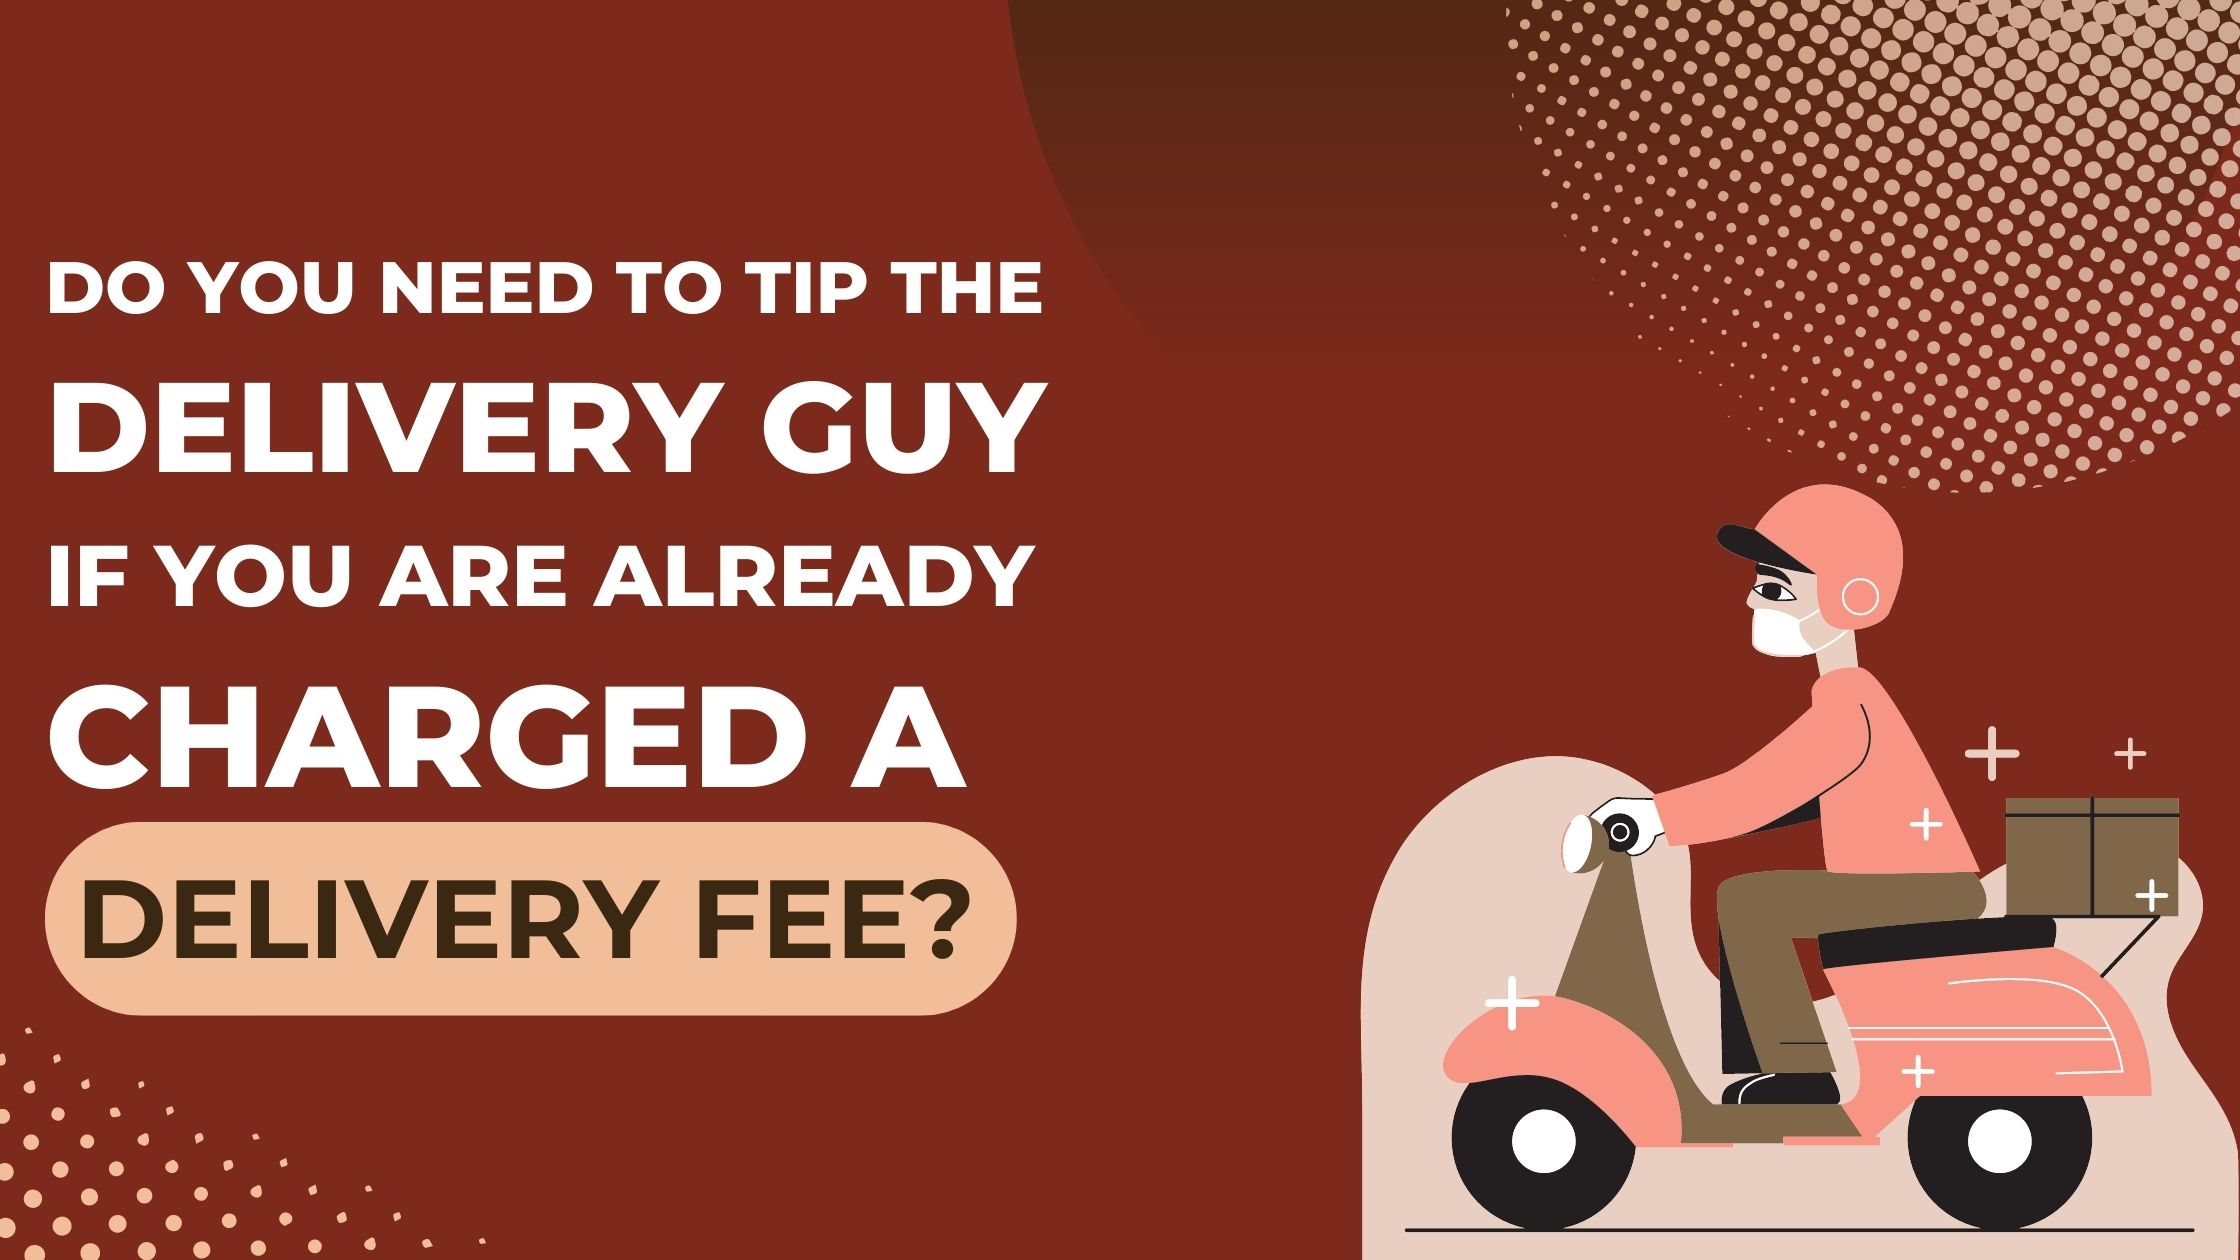 Do You Need to Tip the Delivery Guy if You Are Already Charged a Delivery Fee?